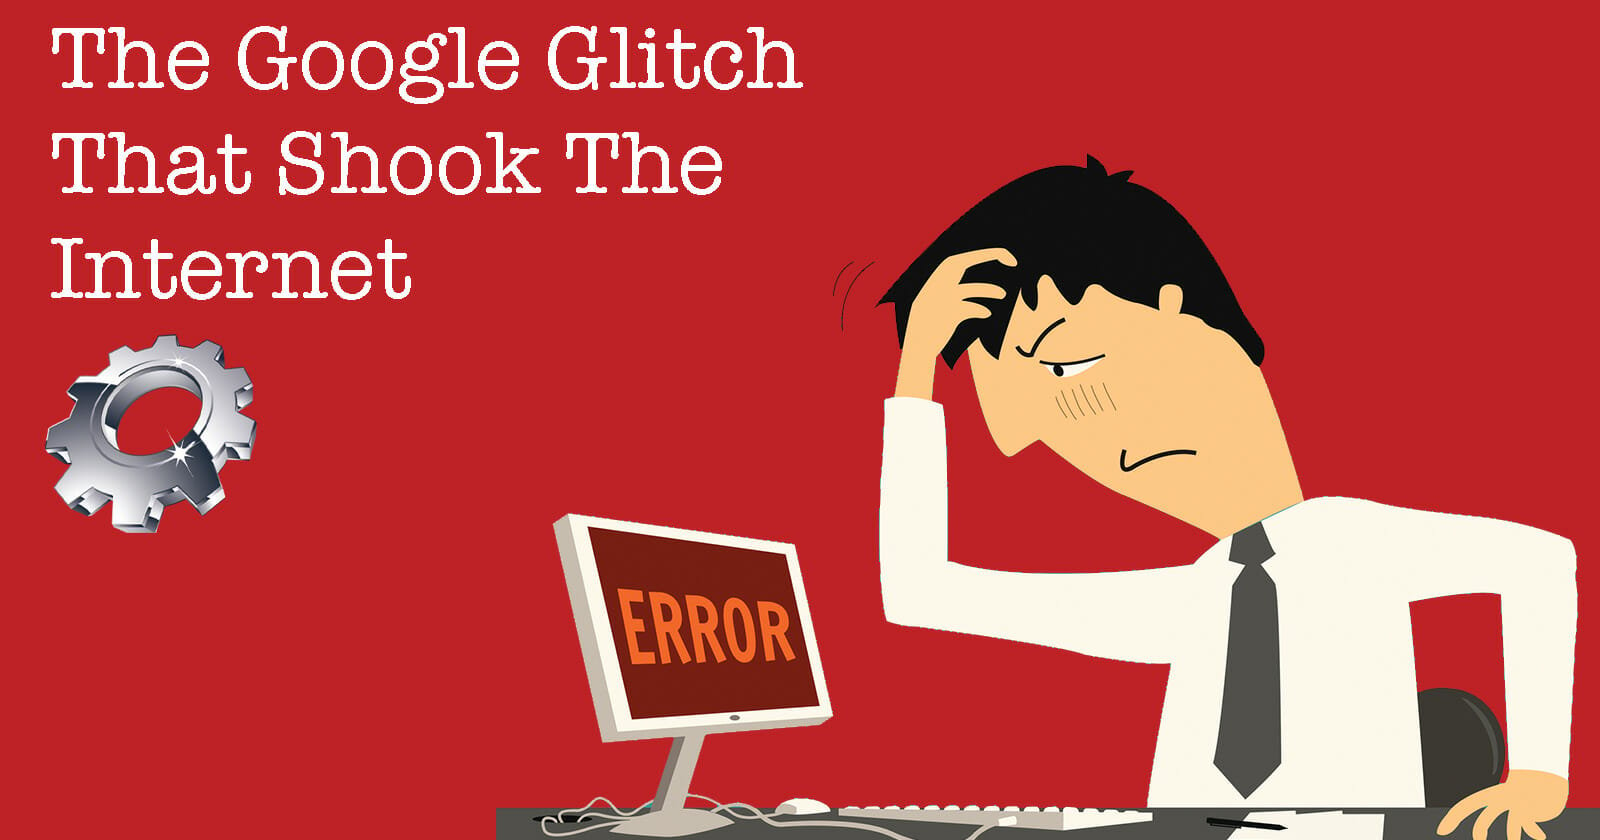 The Google Glitch That Shook The Internet